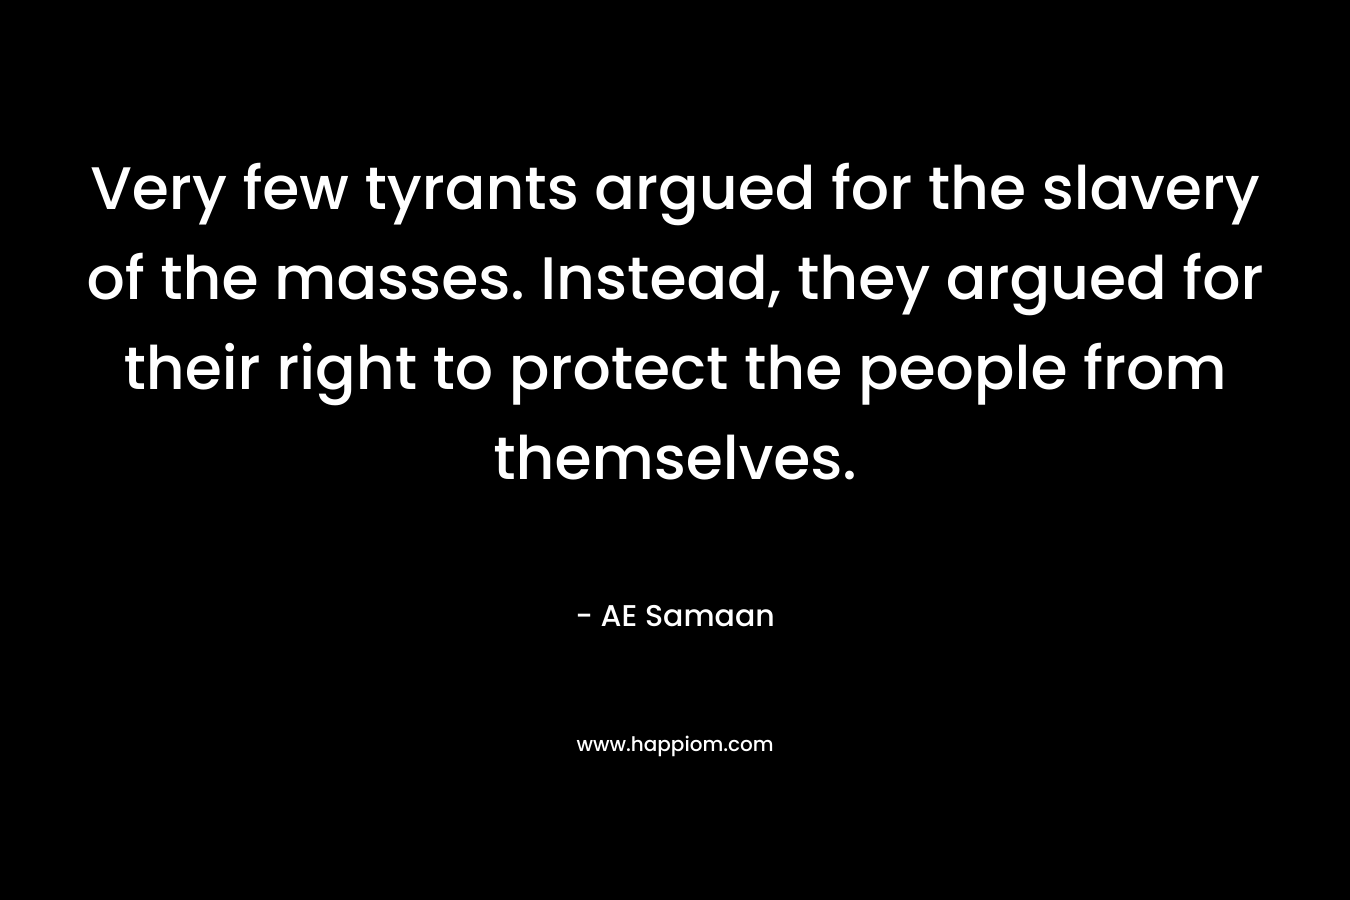 Very few tyrants argued for the slavery of the masses. Instead, they argued for their right to protect the people from themselves. – AE Samaan